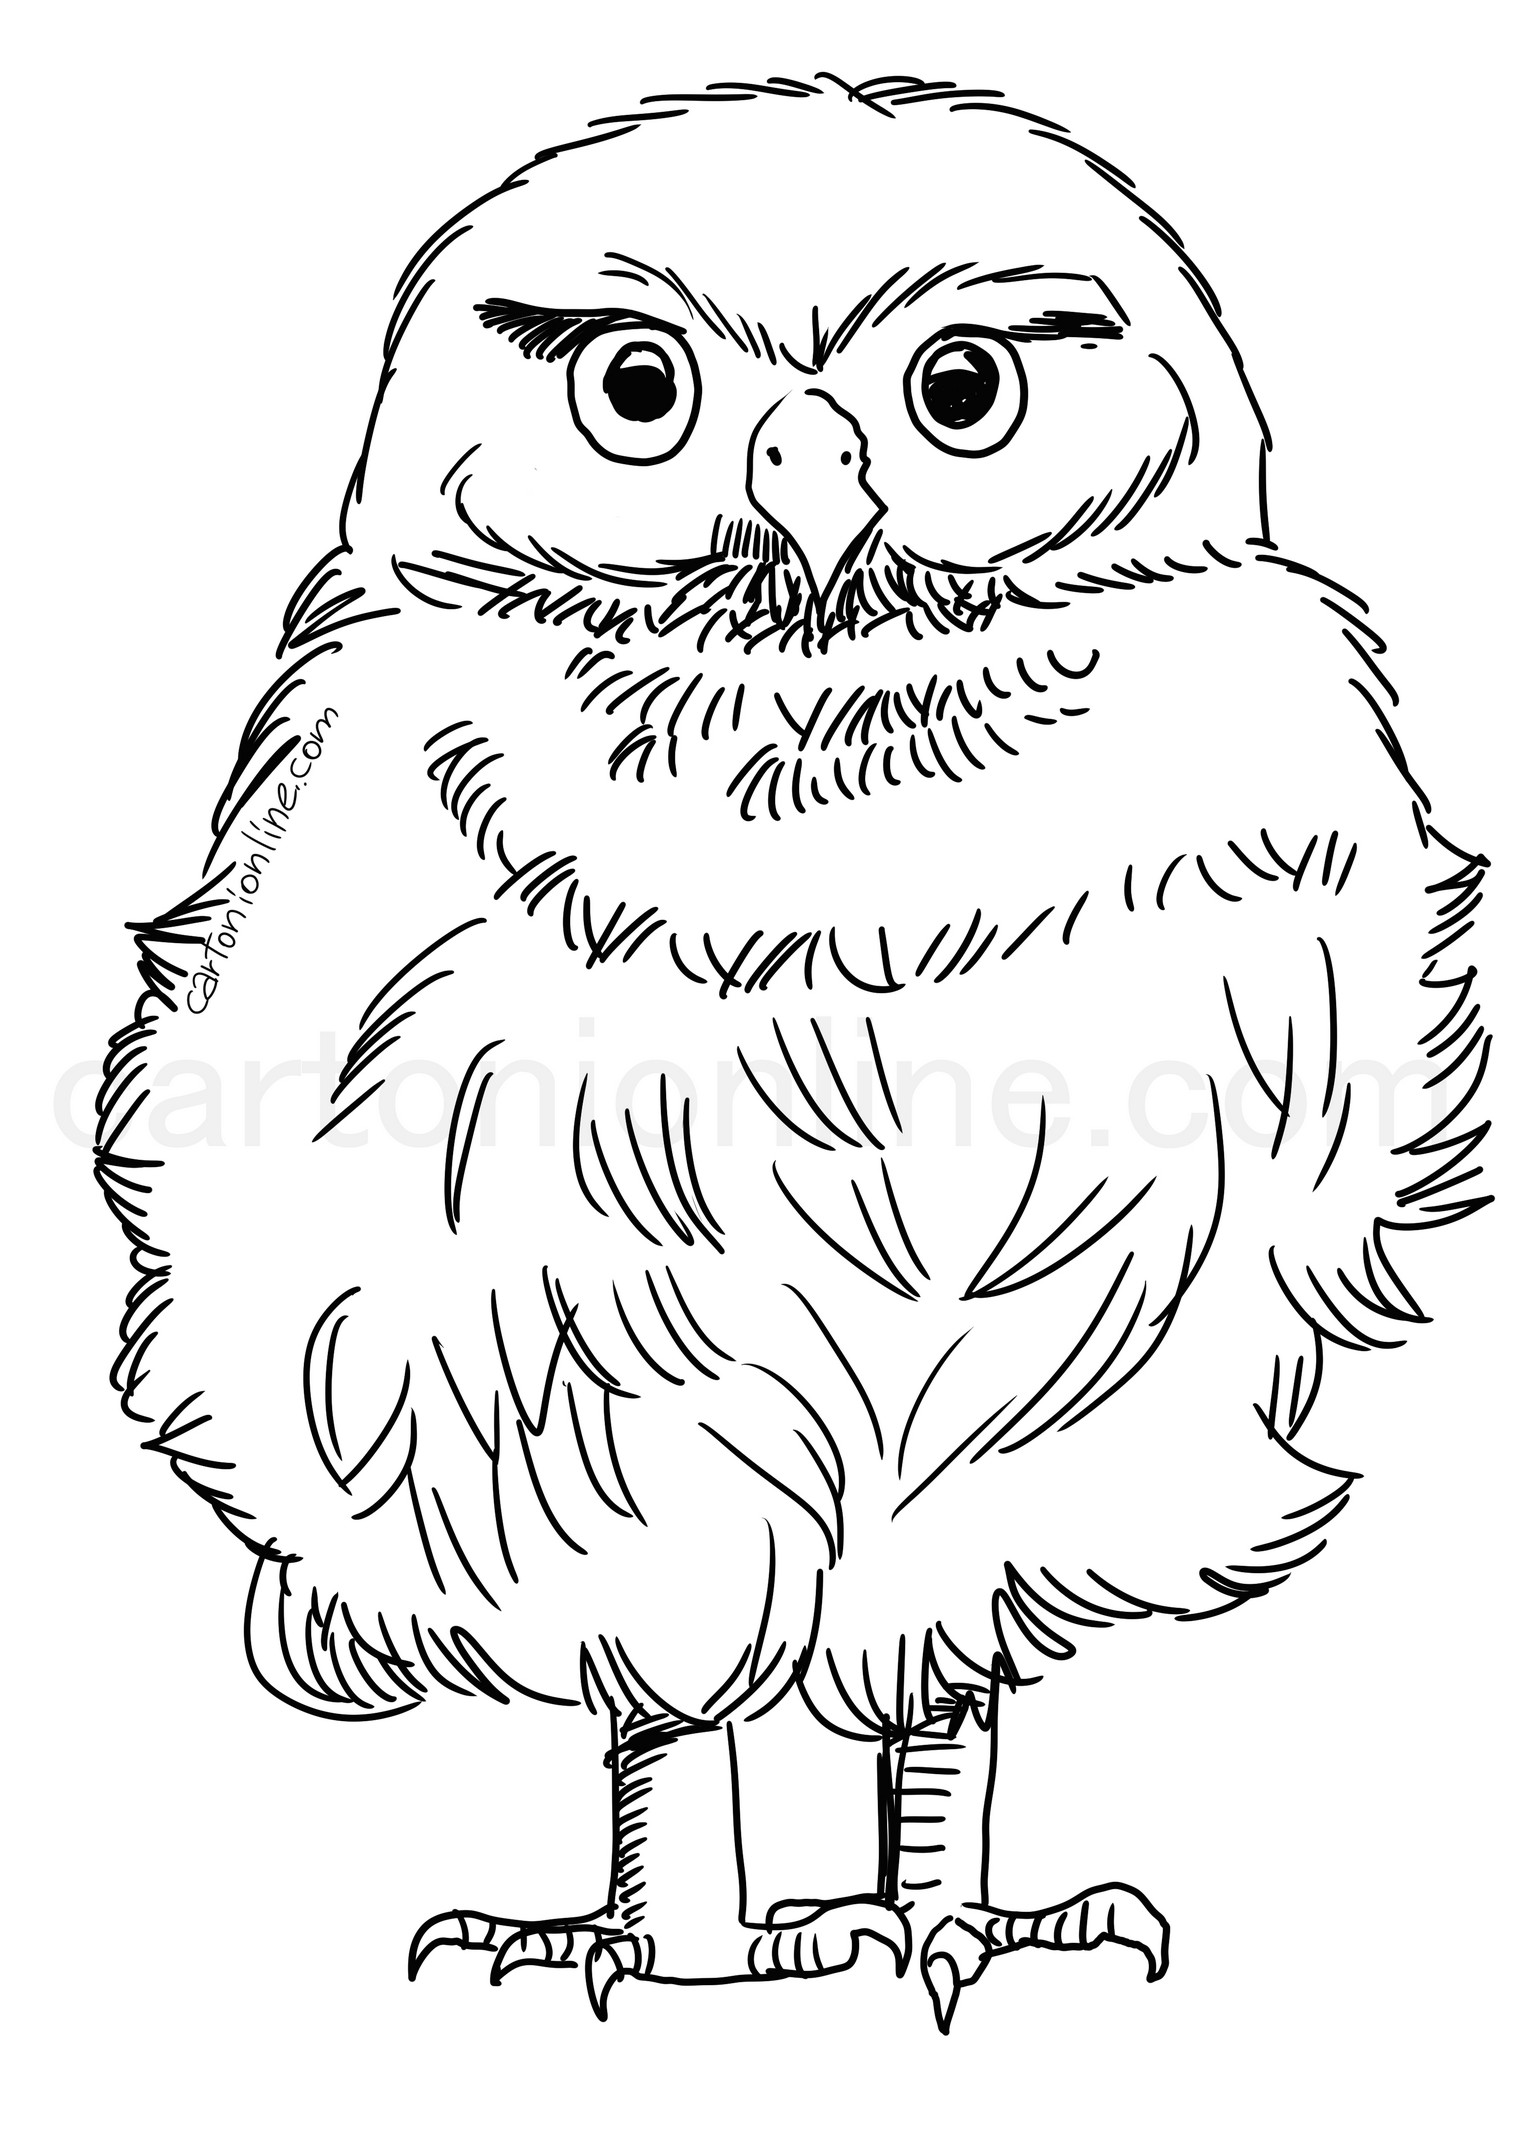 Owl chick coloring page